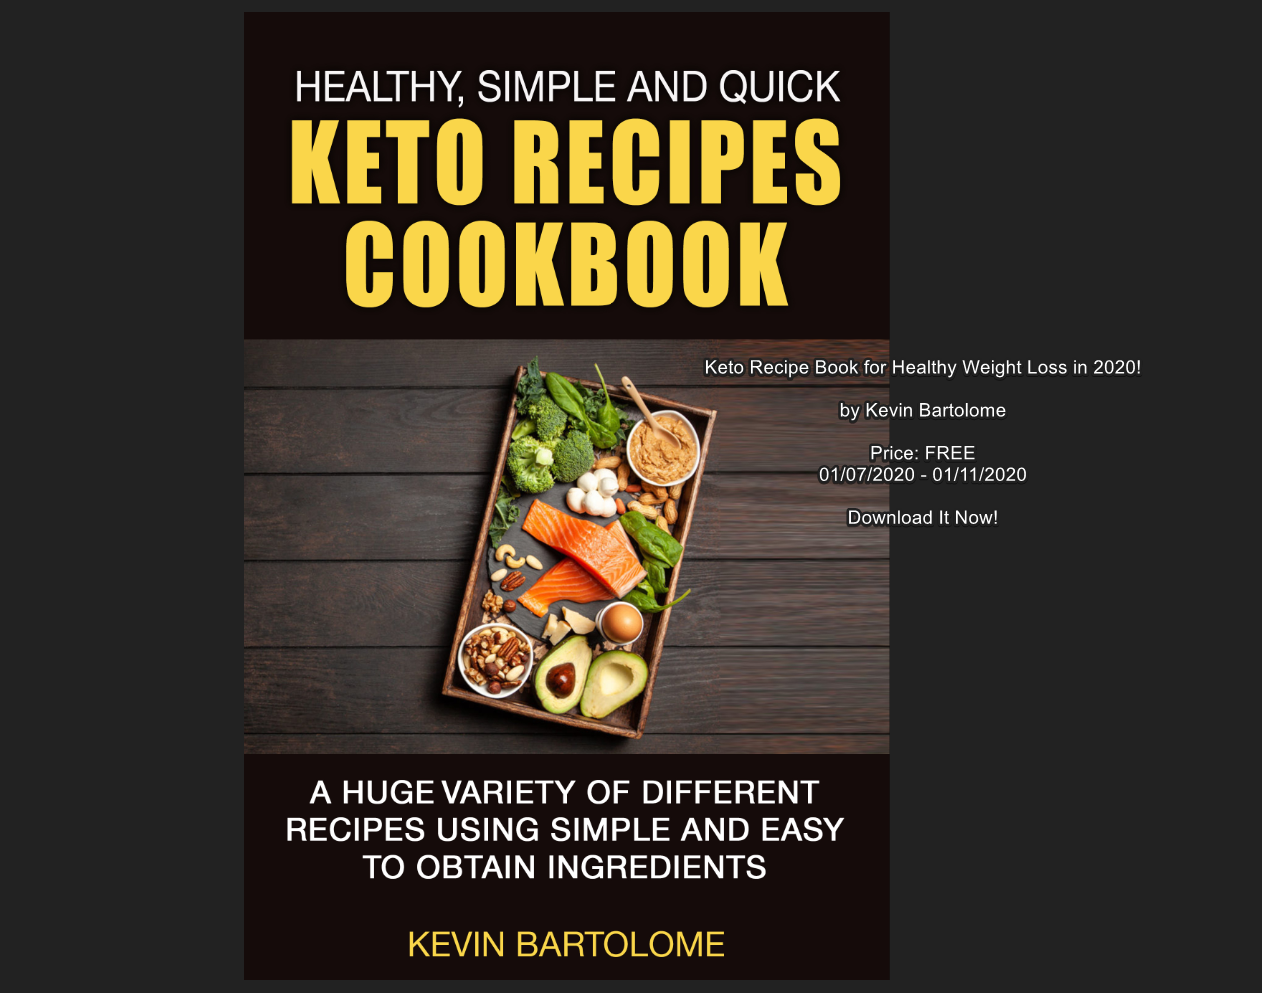 FREE: Keto Recipes Cookbook: Healthy, Simple and Quick Keto Recipes: Keto Recipes Cookbook With a Huge Variety of Different Recipes by Kevin Bartolome